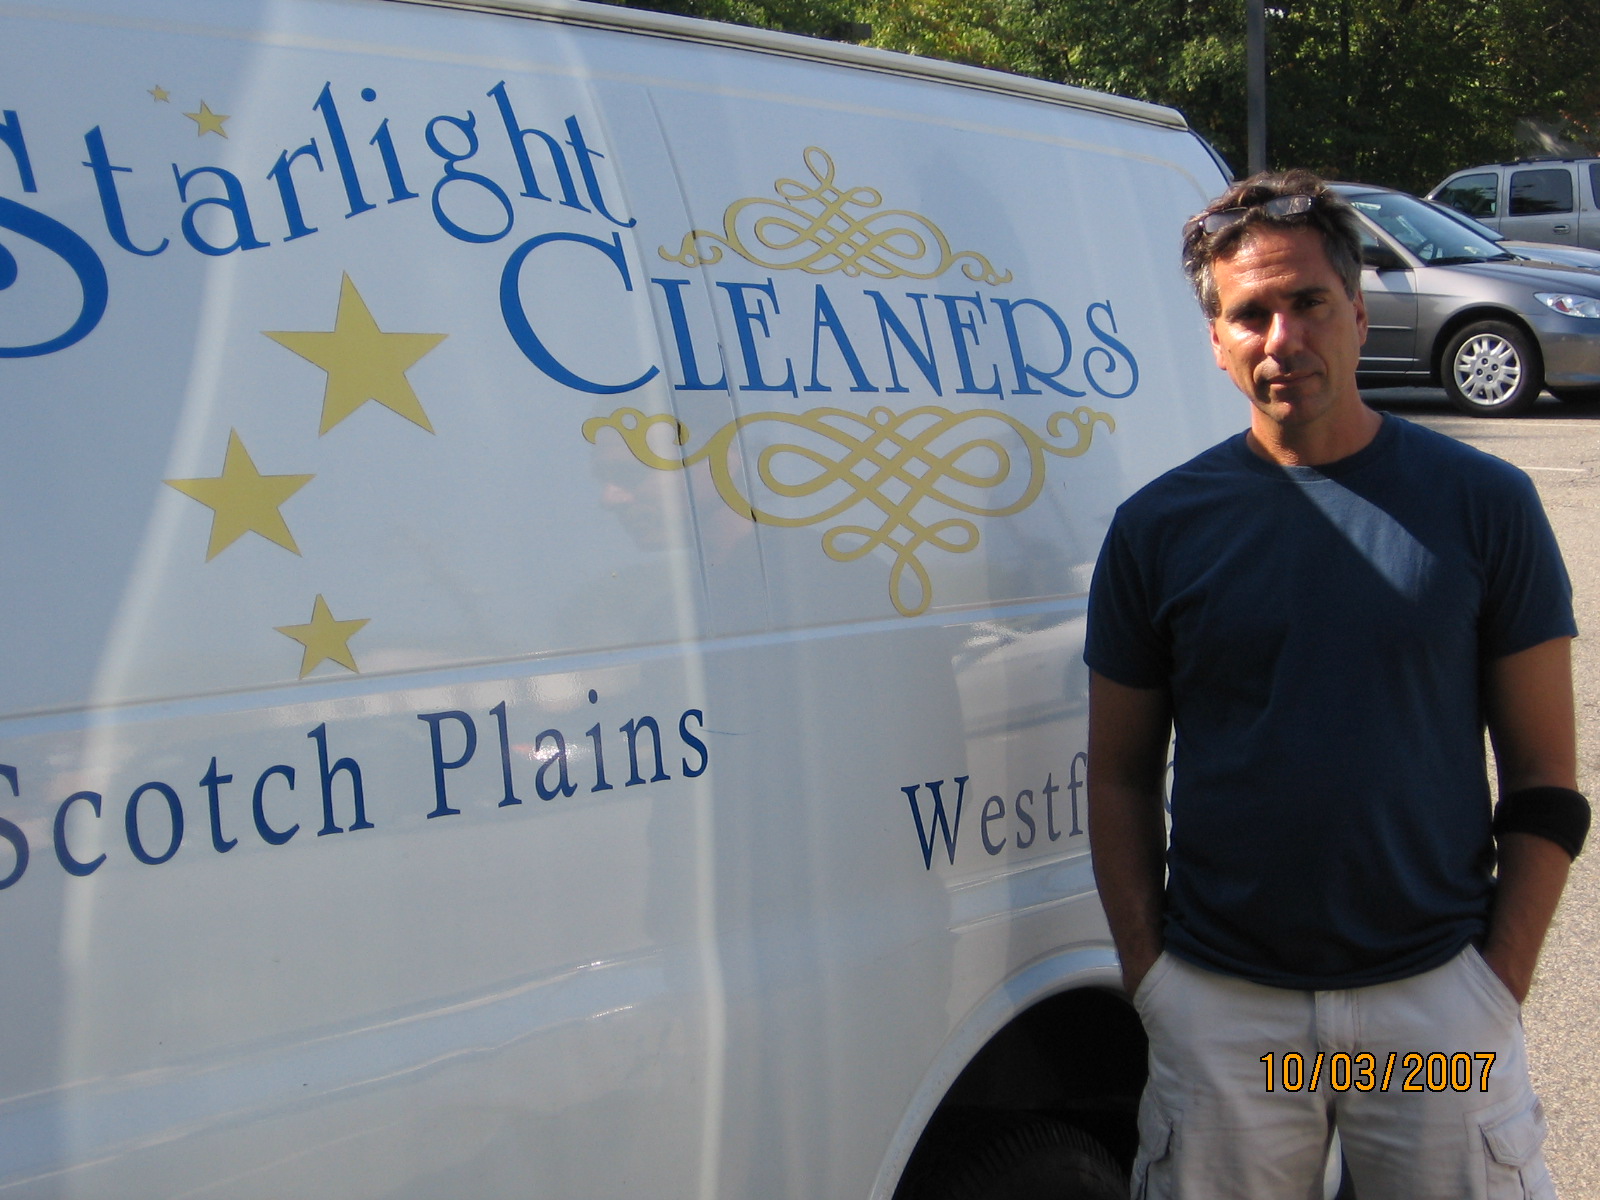 Starlight Cleaners